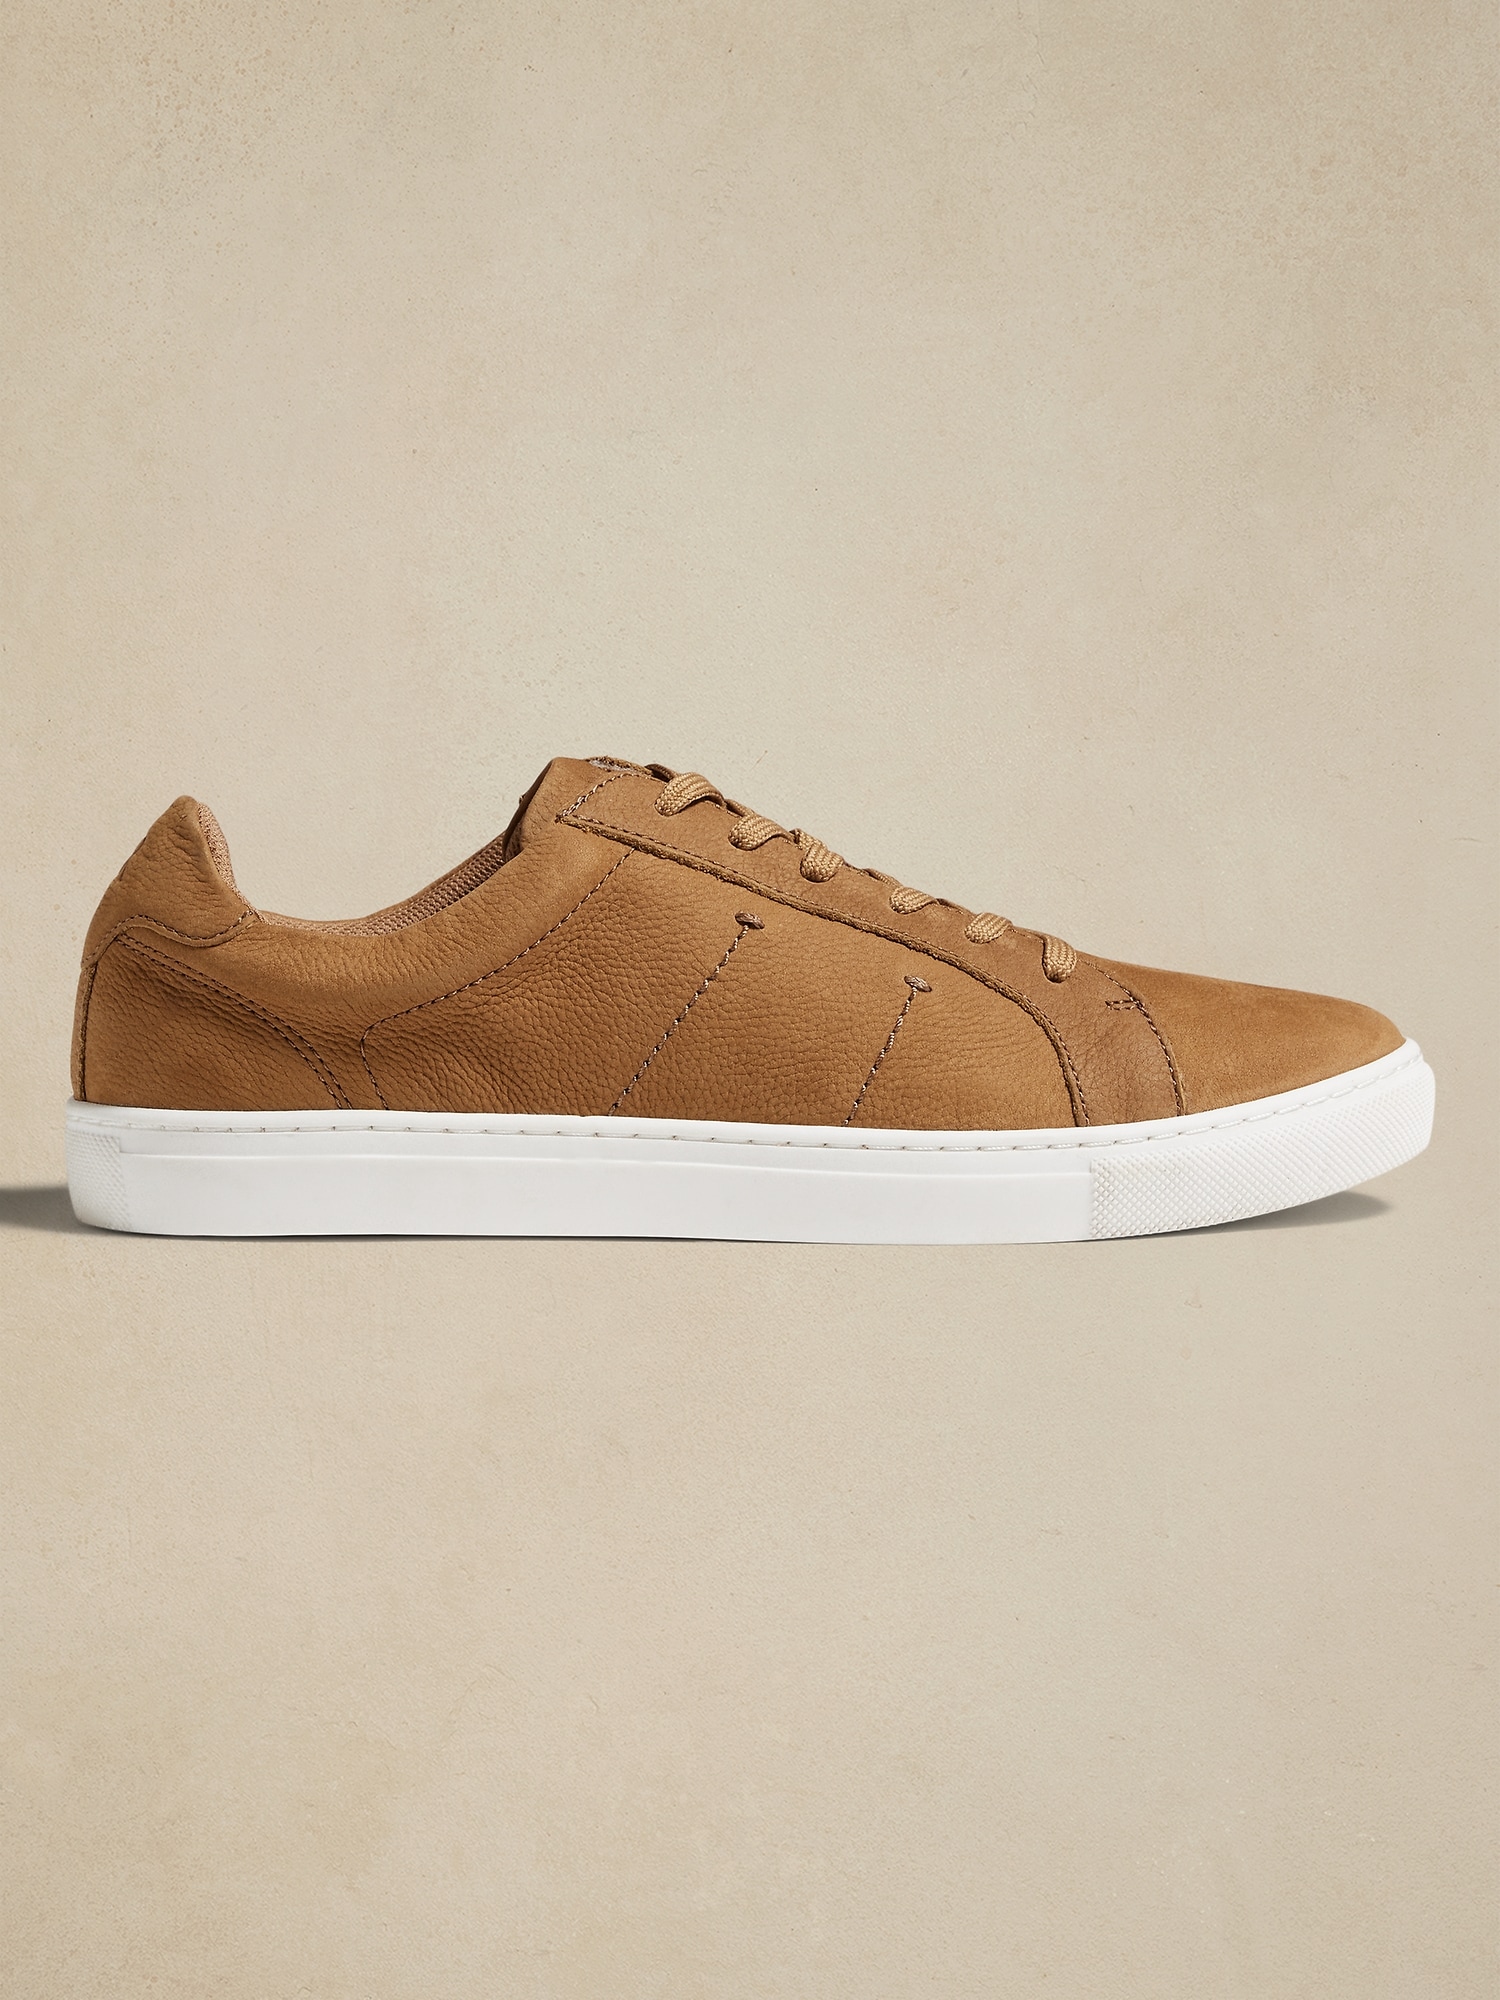 Tumbled Leather Lace-Up Sneaker